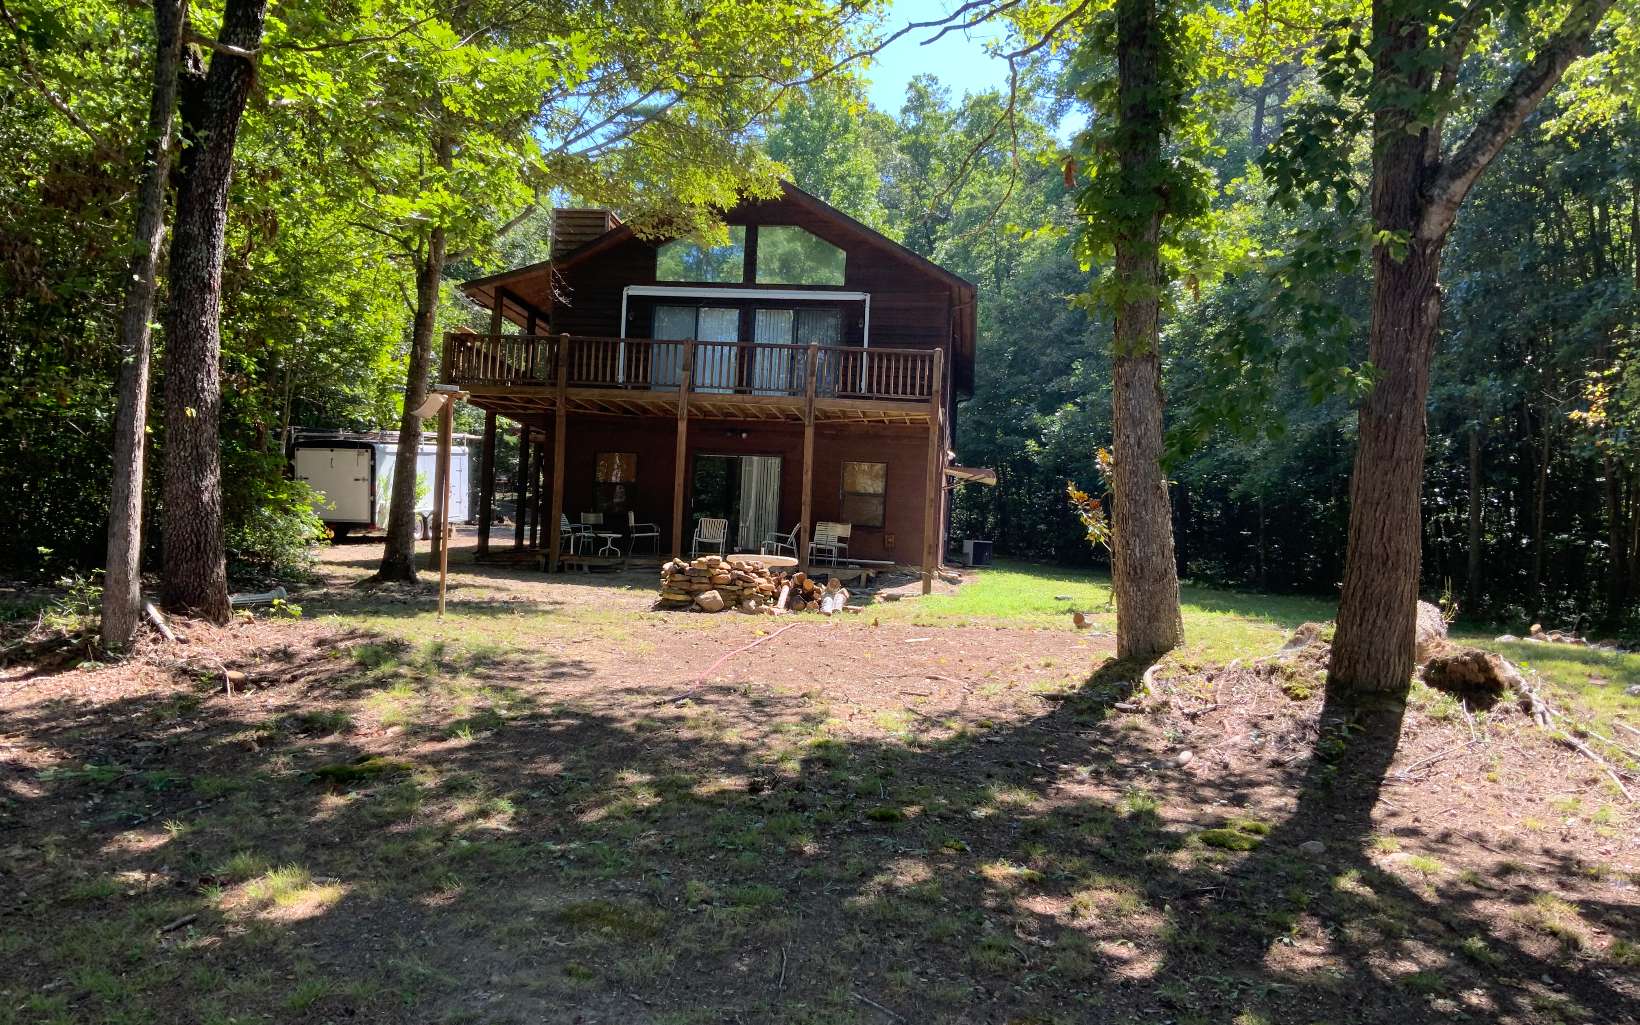 Rare opportunity to own one and a half acres on Lake Nottely with lake access. Current house is a three bedroom, two bathroom home, with unfinished basement, separate two car garage and additional storage shed. Great space to expand or build new.